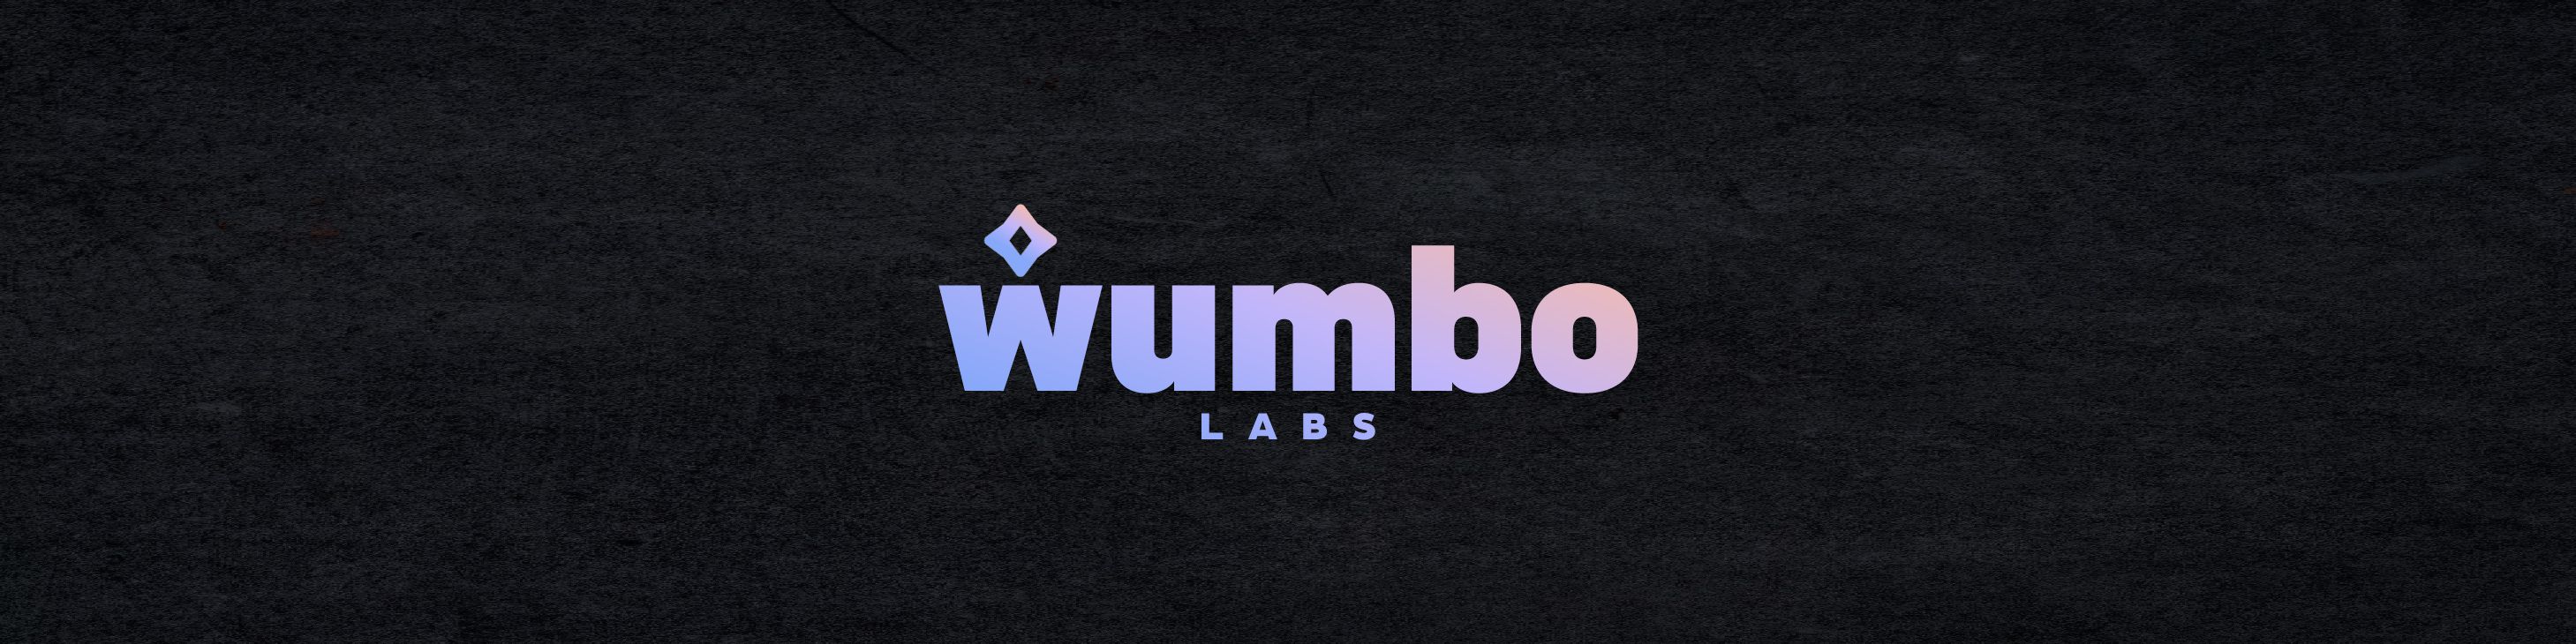 WumboLabs banner